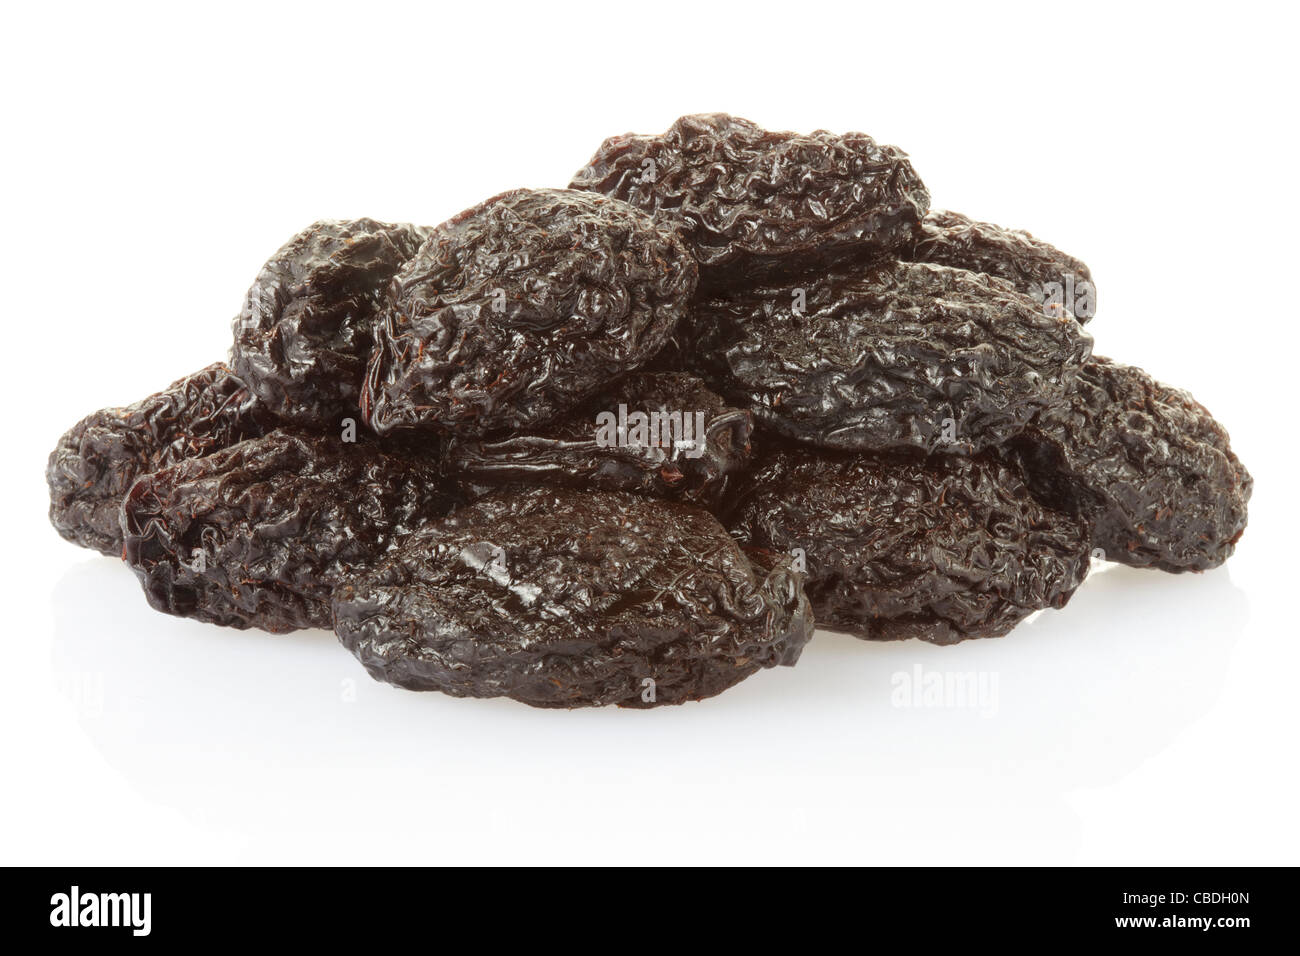 Dried plums or prunes Stock Photo